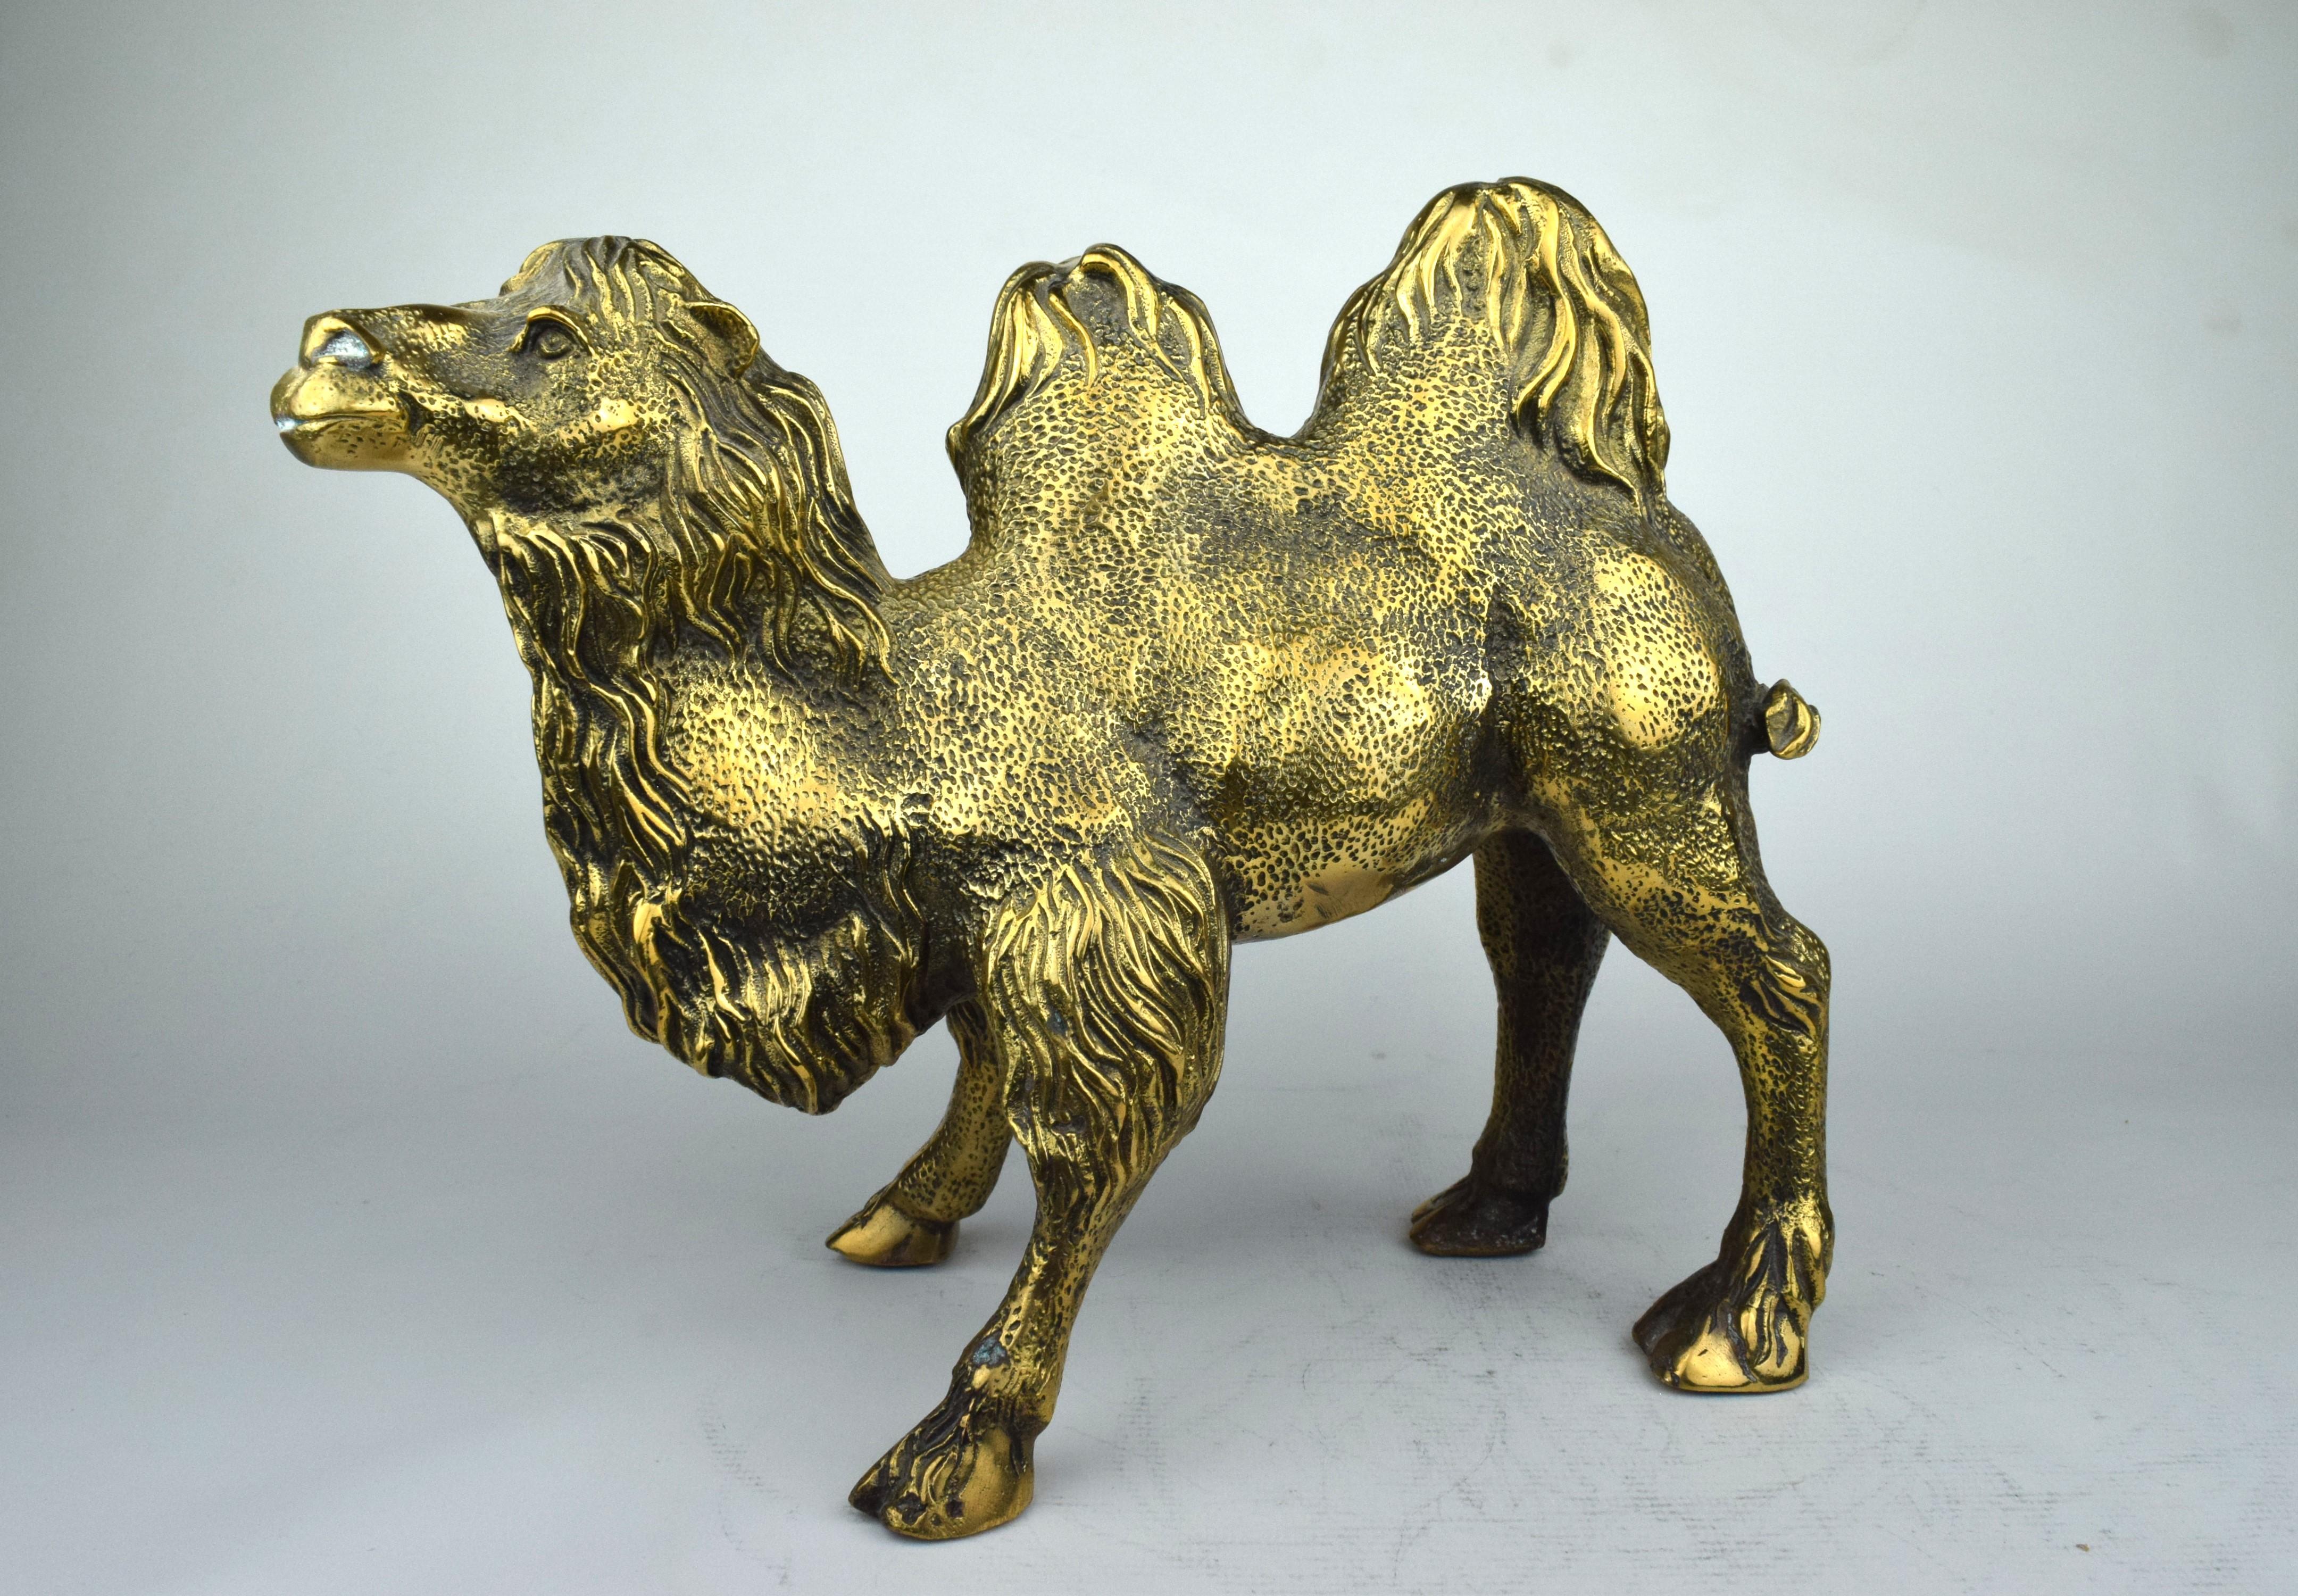 The pair of Indian brass engraved camel sculptures is an exquisite examples of traditional Indian metalwork, combining skilled craftsmanship with artistic detailing. These sculptures, made of brass for its durability and versatility, showcase the